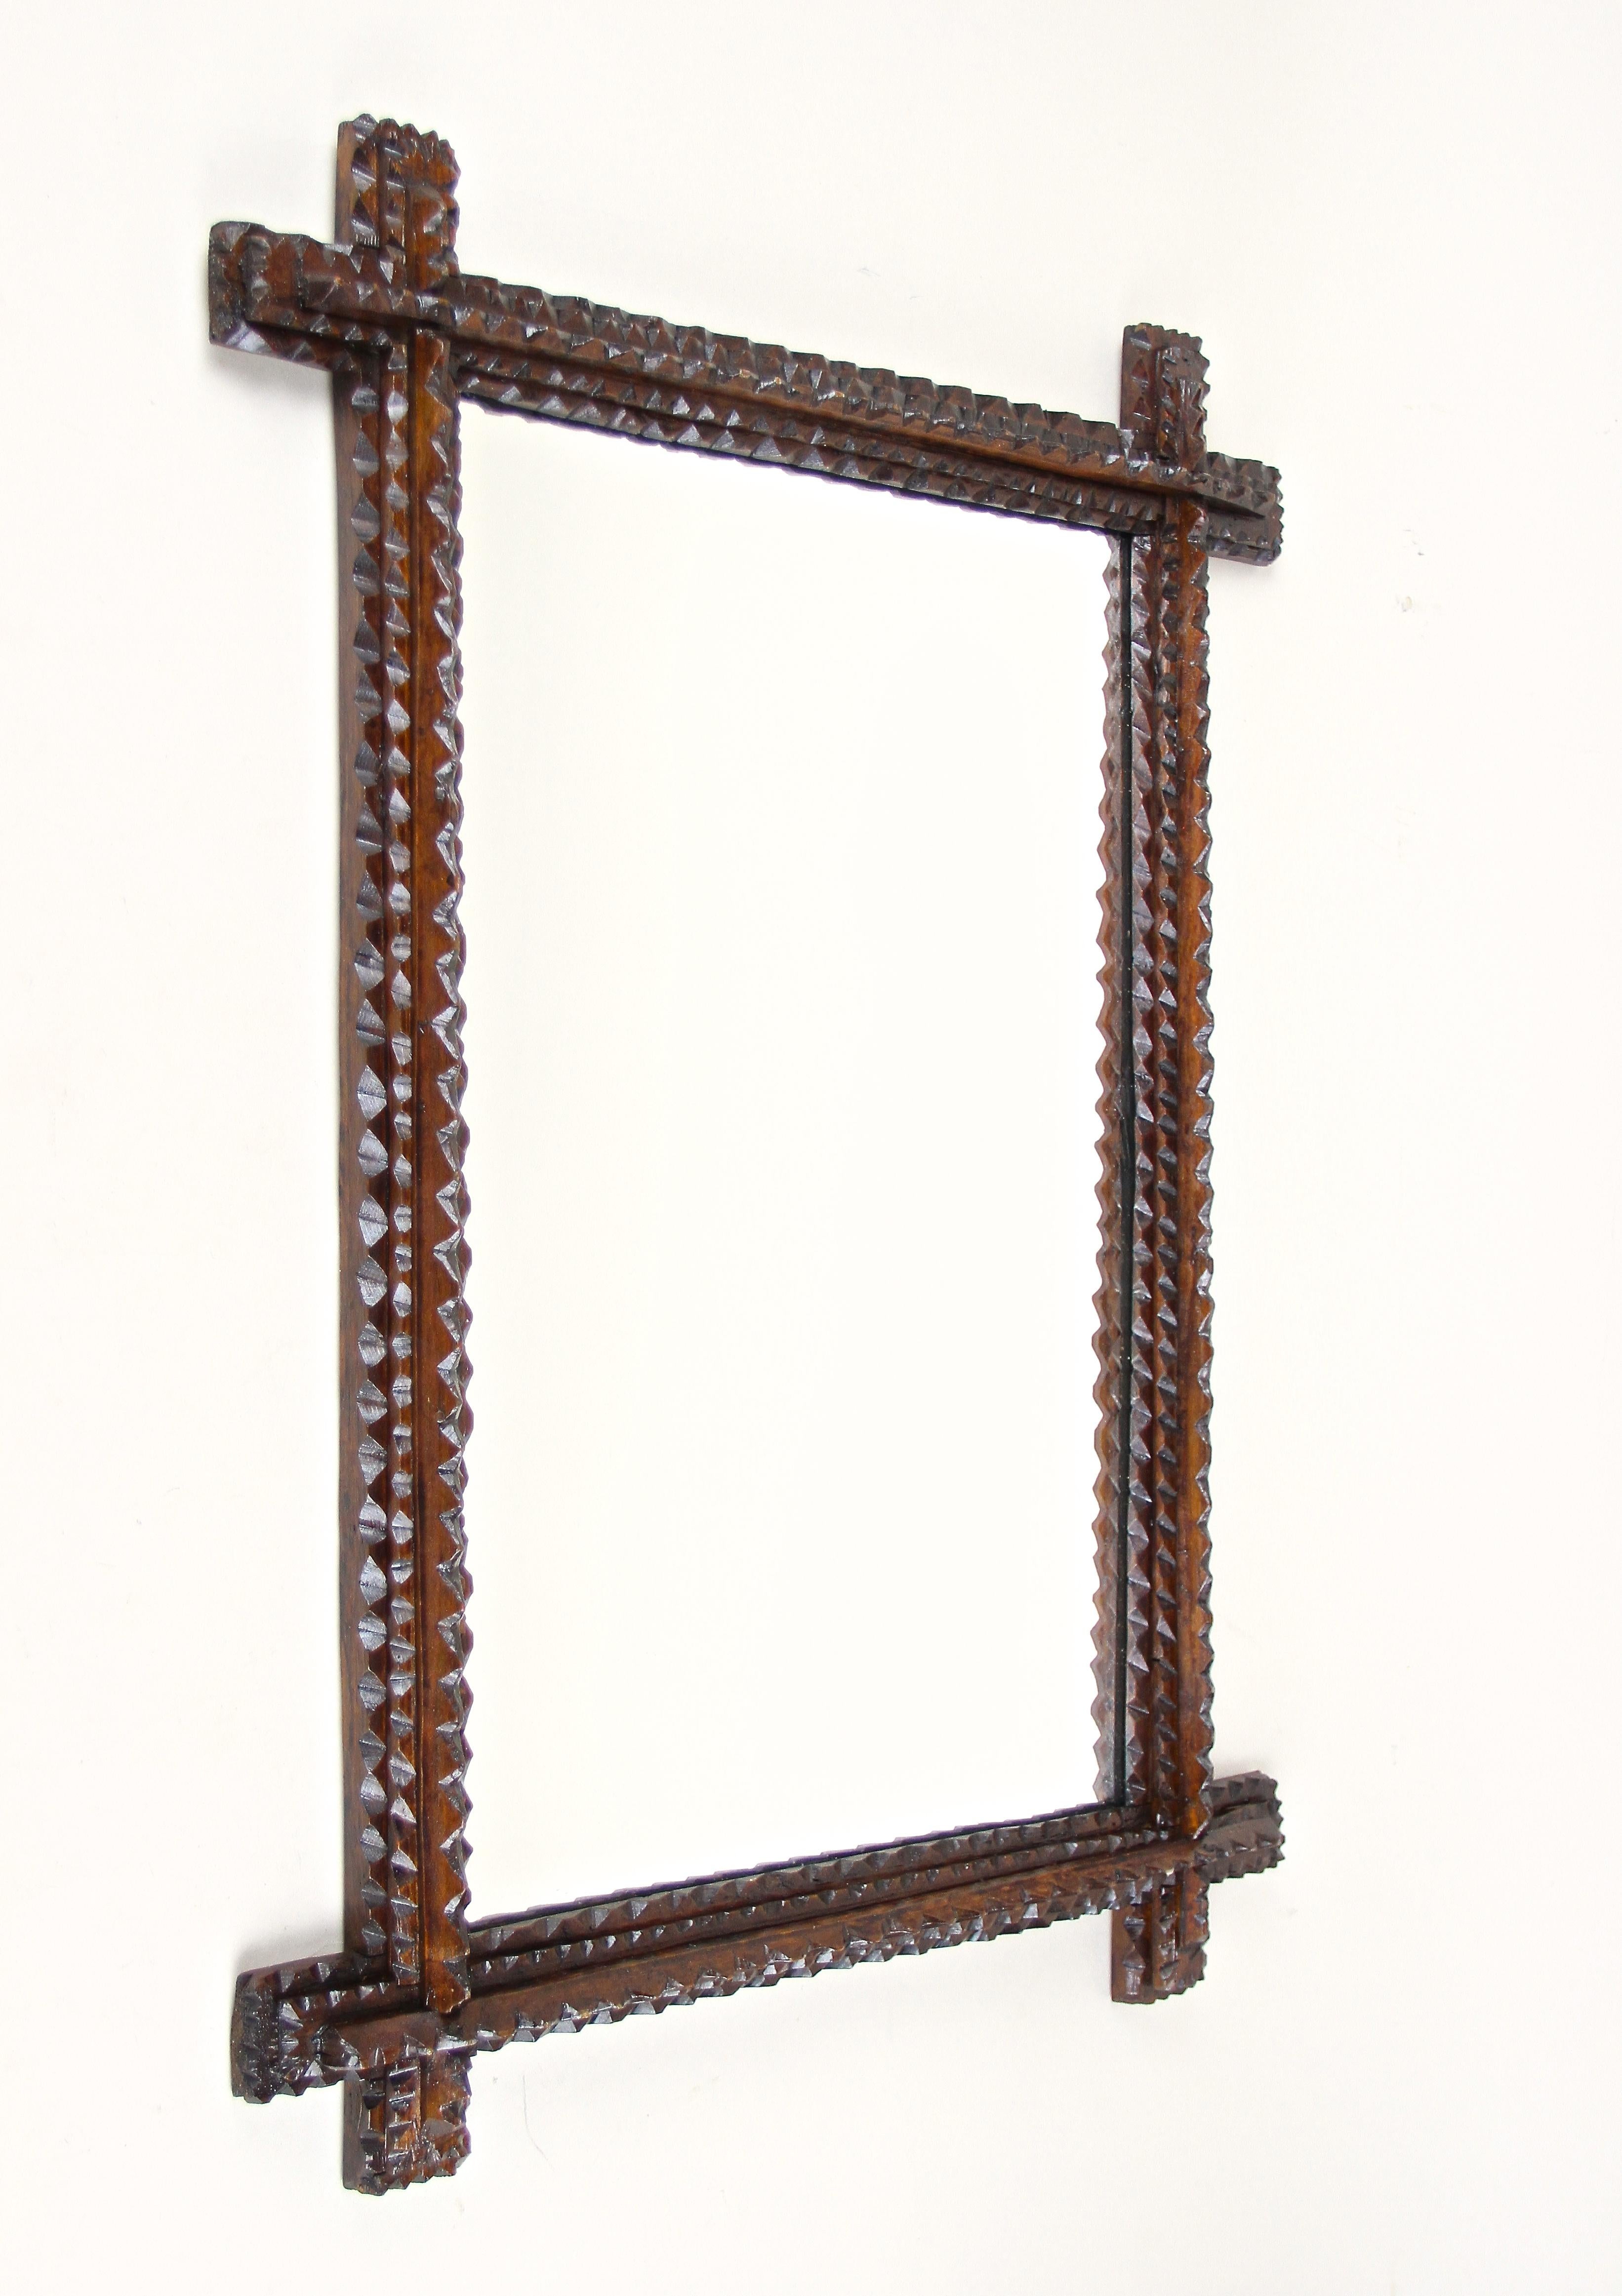 Exceptional looking rustic 19th century Tramp Art mirror out of Austria. This fantastic rustic wall mirror from around 1870 convinces by its great variety of chip carvings. Slightly protruding corners and the dark brown stained frame makes this